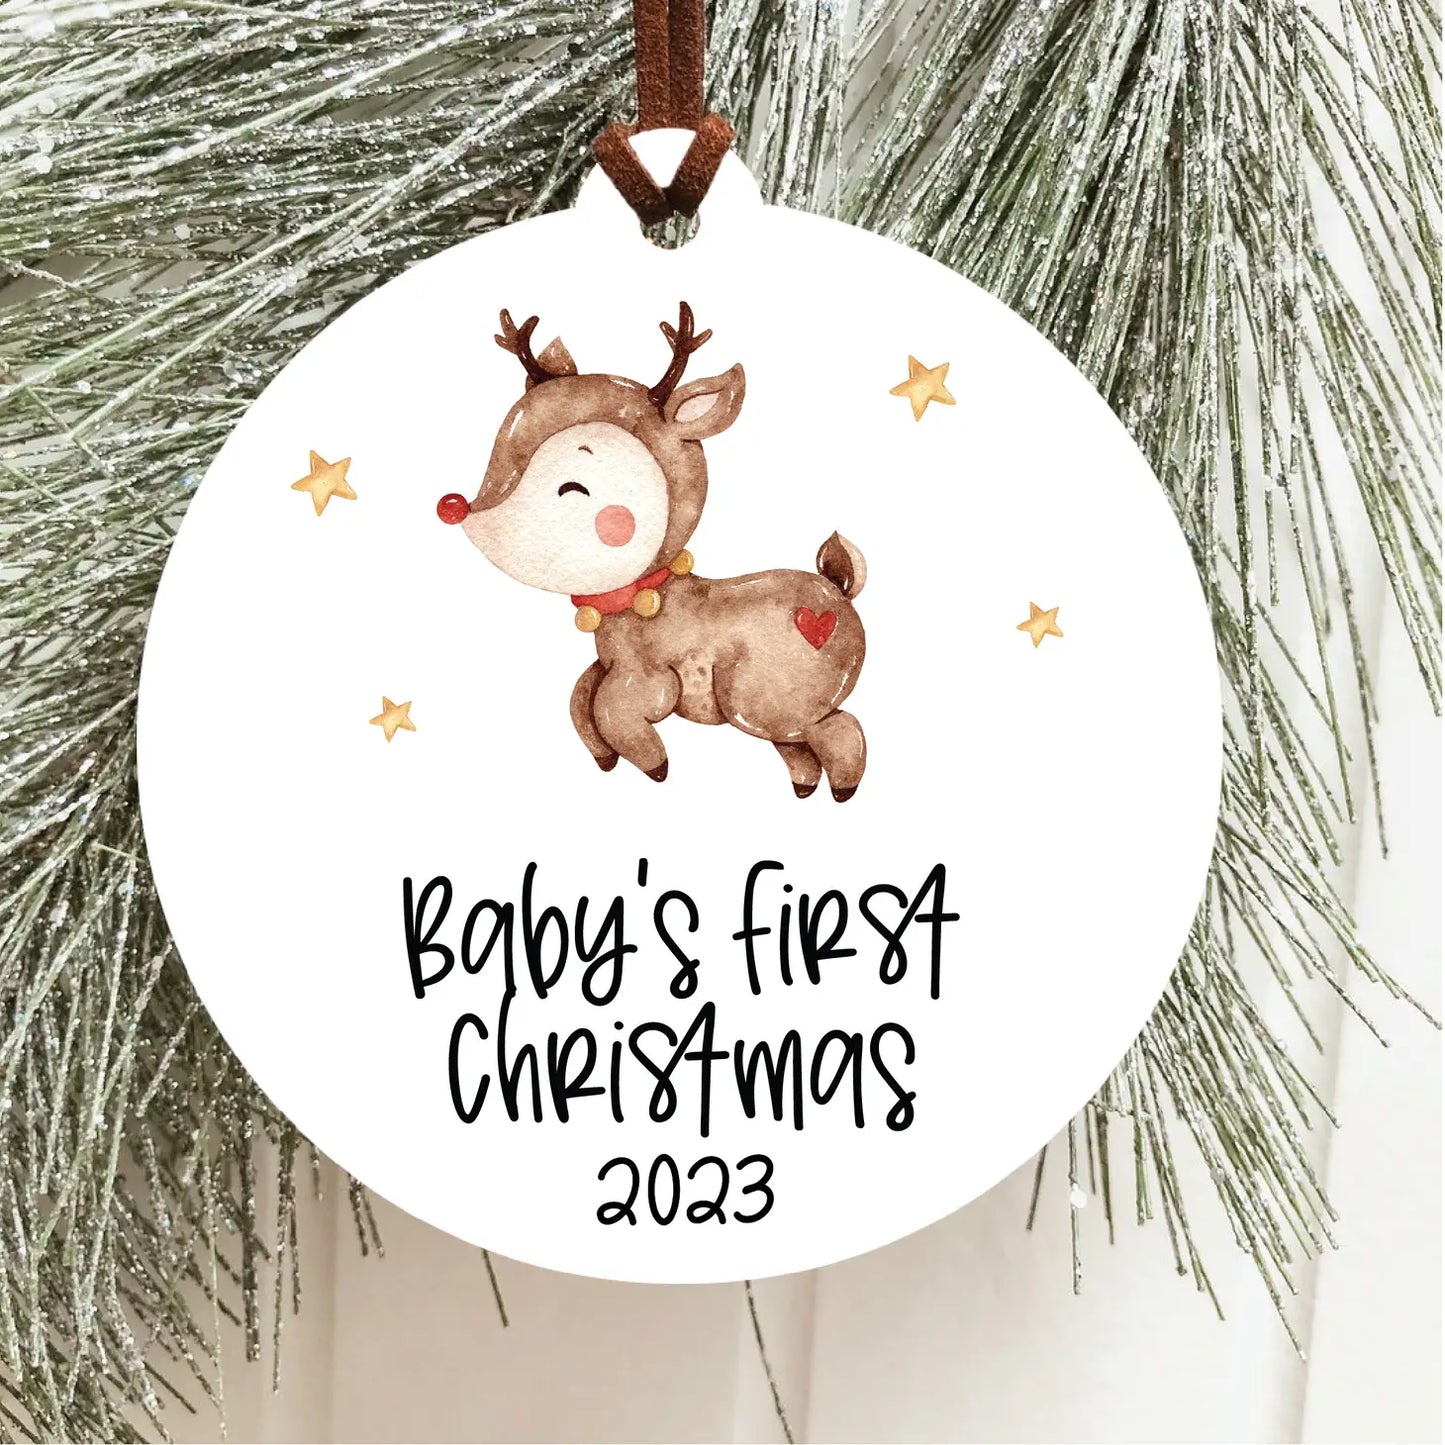 Baby's First Christmas (Reindeer)